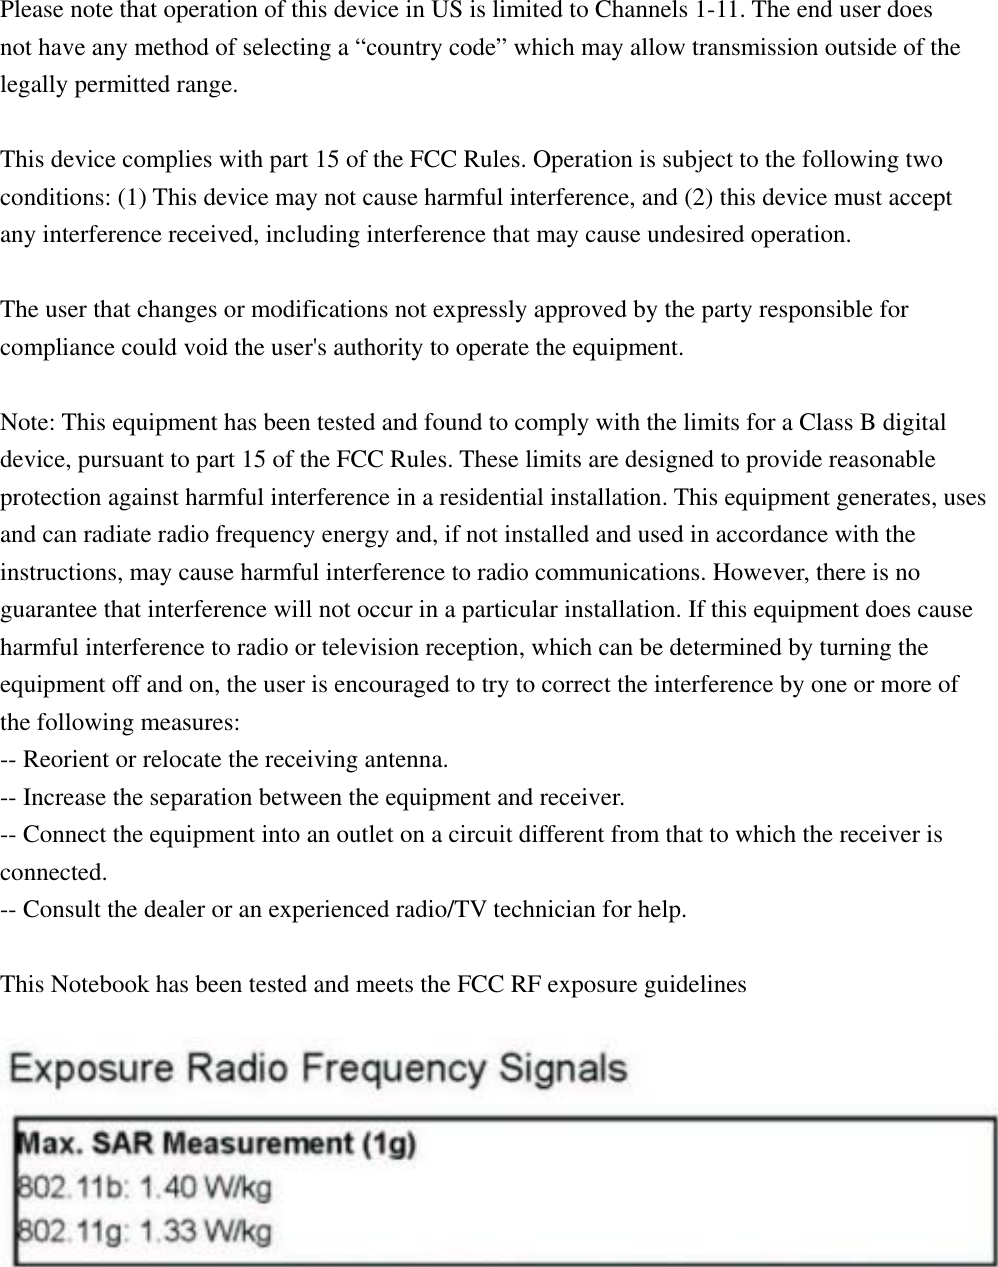  Please note that operation of this device in US is limited to Channels 1-11. The end user does  not have any method of selecting a “country code” which may allow transmission outside of the legally permitted range.  This device complies with part 15 of the FCC Rules. Operation is subject to the following two conditions: (1) This device may not cause harmful interference, and (2) this device must accept any interference received, including interference that may cause undesired operation.    The user that changes or modifications not expressly approved by the party responsible for compliance could void the user&apos;s authority to operate the equipment.  Note: This equipment has been tested and found to comply with the limits for a Class B digital device, pursuant to part 15 of the FCC Rules. These limits are designed to provide reasonable protection against harmful interference in a residential installation. This equipment generates, uses and can radiate radio frequency energy and, if not installed and used in accordance with the instructions, may cause harmful interference to radio communications. However, there is no guarantee that interference will not occur in a particular installation. If this equipment does cause harmful interference to radio or television reception, which can be determined by turning the equipment off and on, the user is encouraged to try to correct the interference by one or more of the following measures:   -- Reorient or relocate the receiving antenna.   -- Increase the separation between the equipment and receiver.   -- Connect the equipment into an outlet on a circuit different from that to which the receiver is connected.  -- Consult the dealer or an experienced radio/TV technician for help.  This Notebook has been tested and meets the FCC RF exposure guidelines     